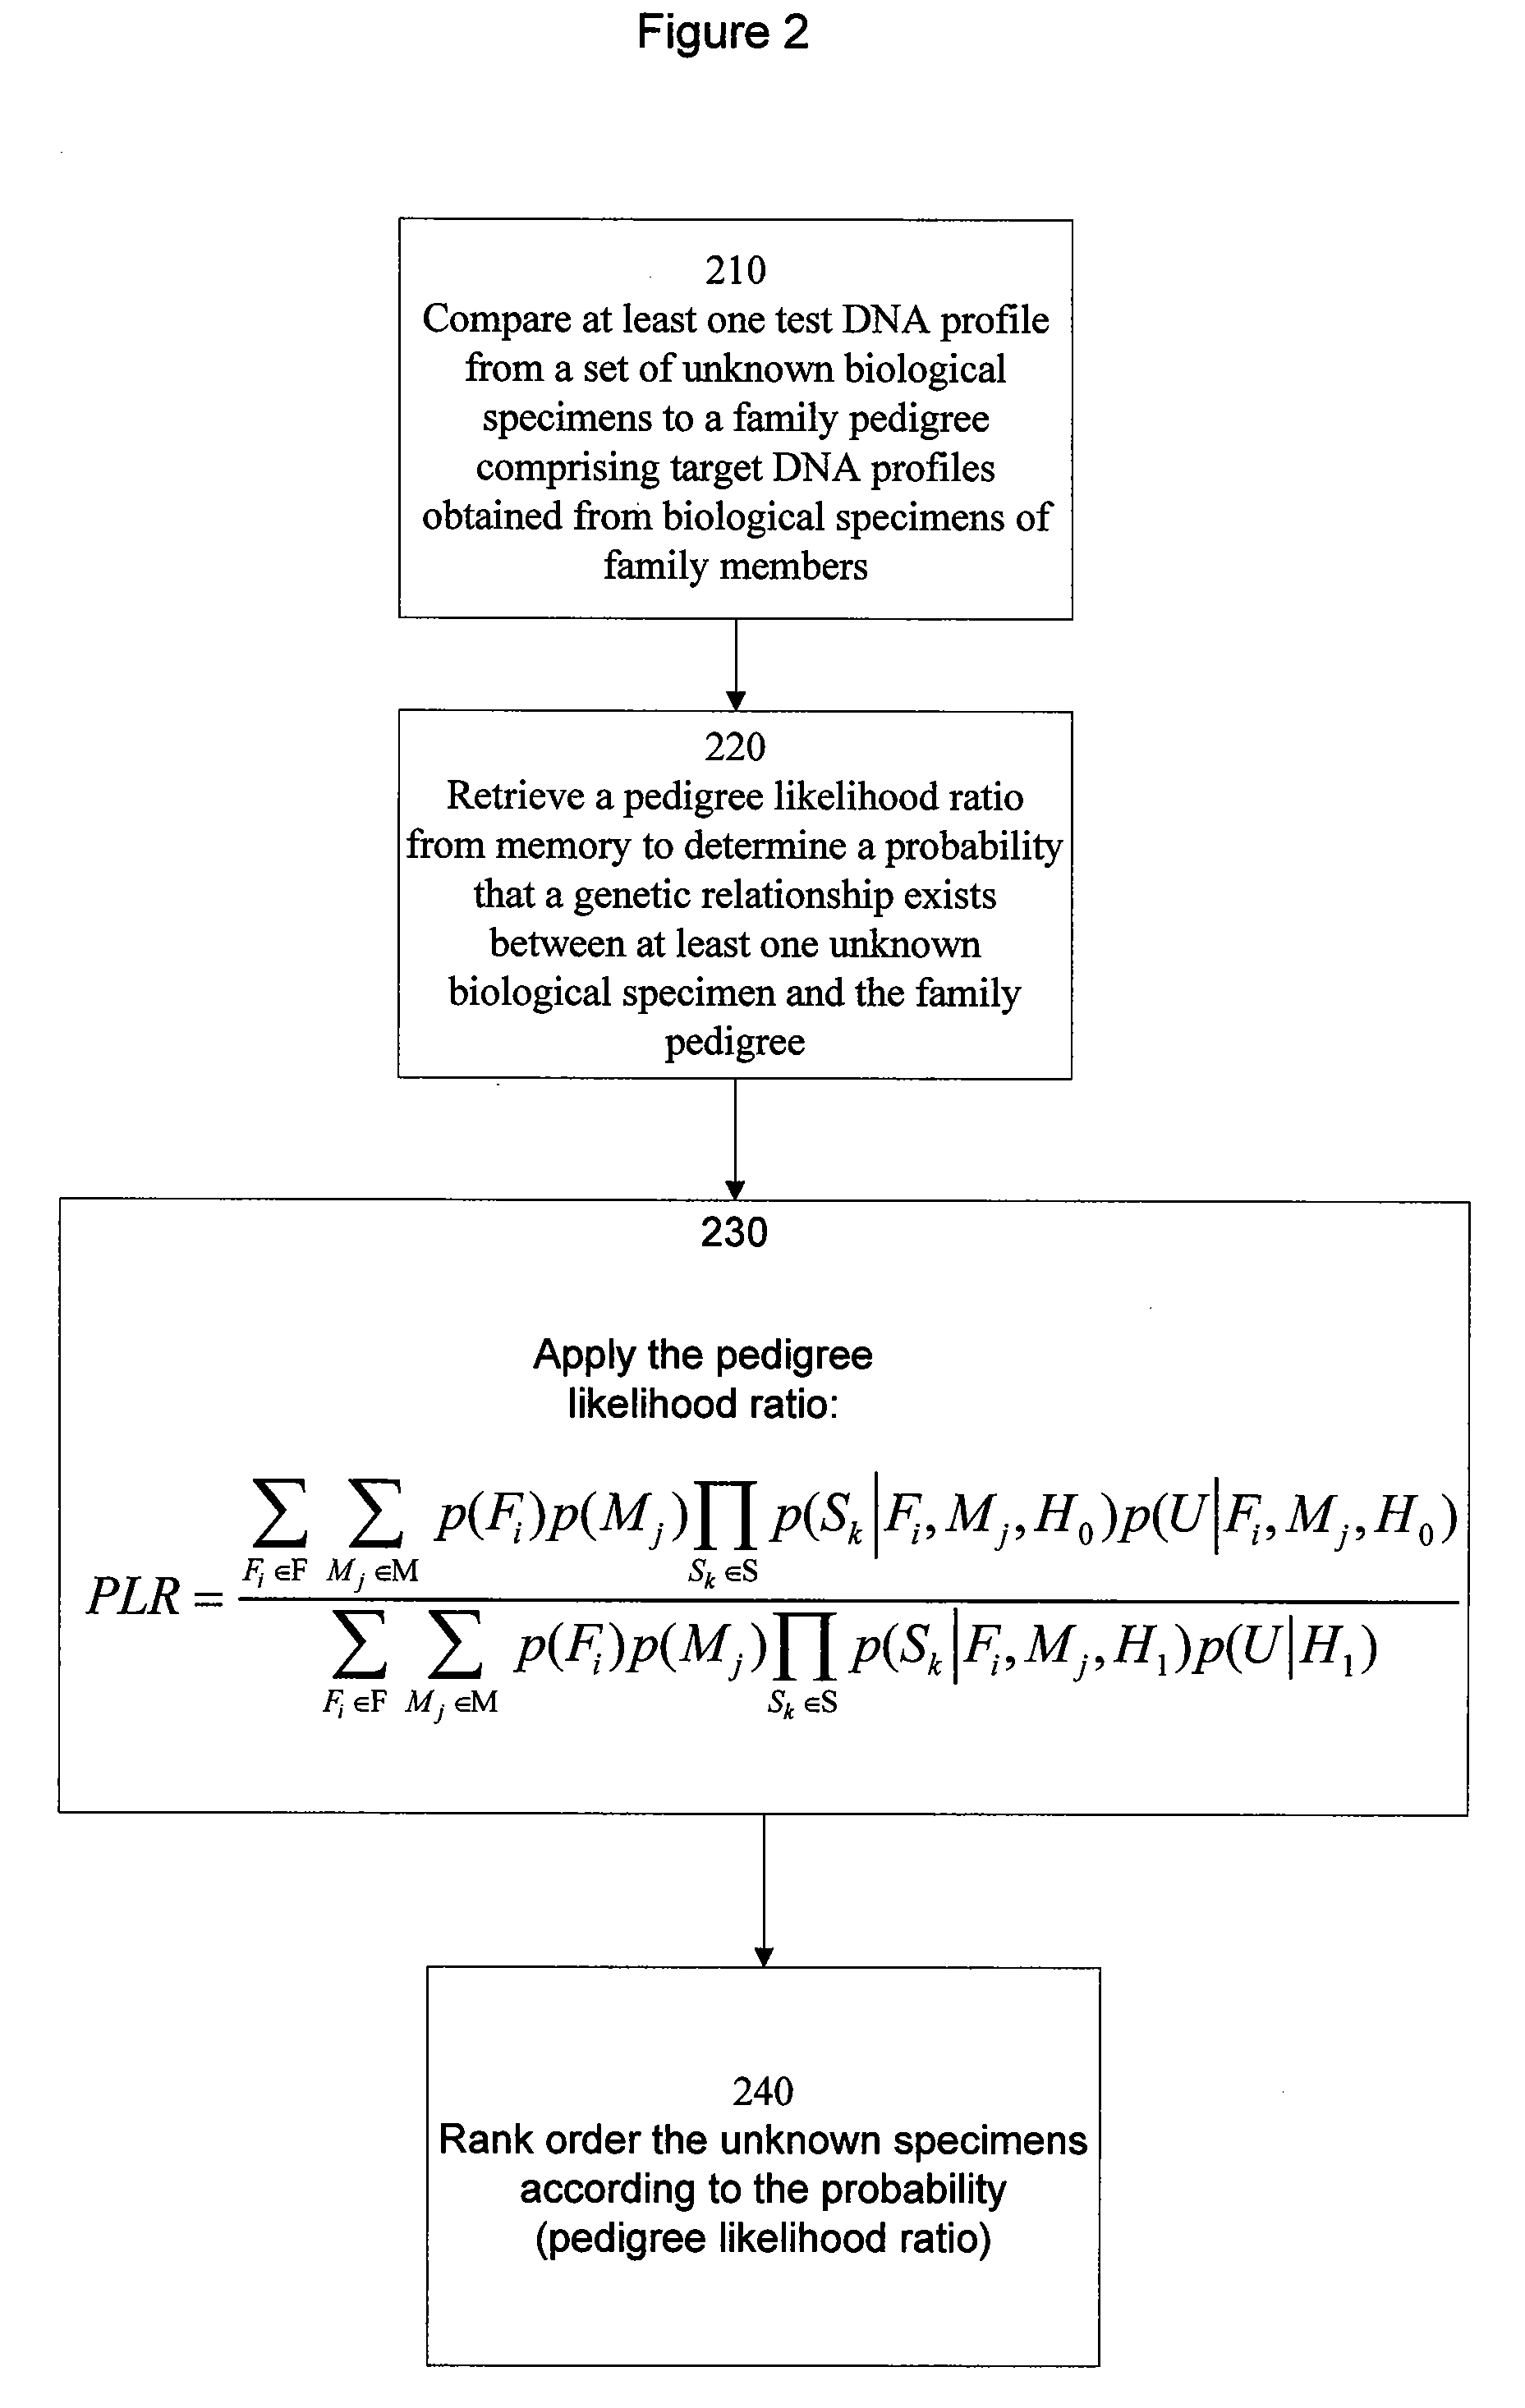 Methods of associating an unknown biological specimen with a family